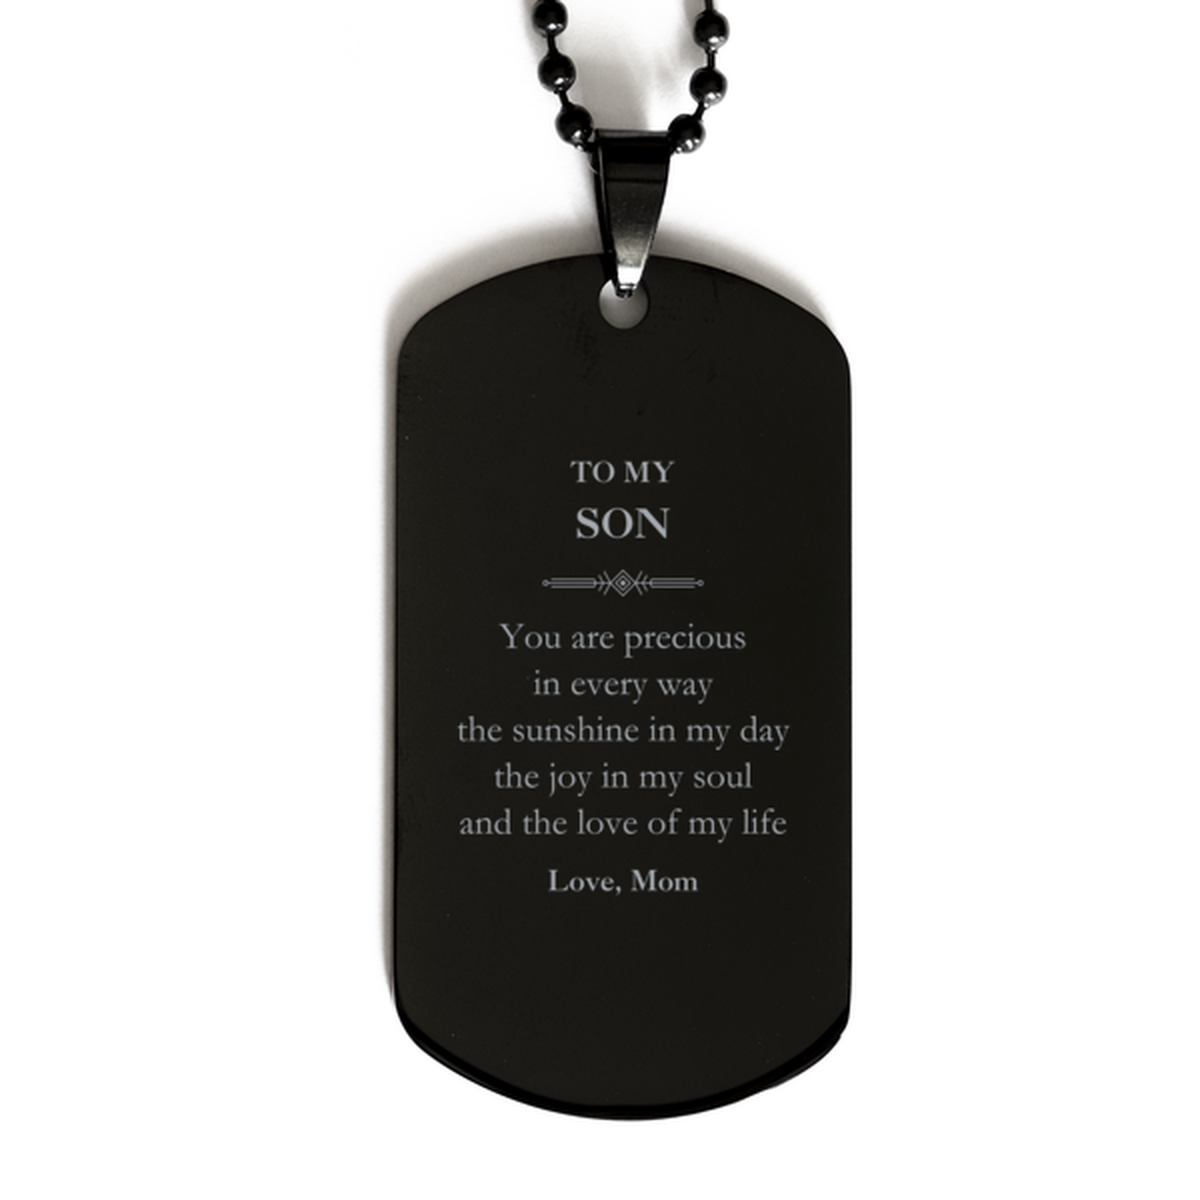 Graduation Gifts for Son Black Dog Tag Present from Mom, Christmas Son Birthday Gifts Son You are precious in every way the sunshine in my day. Love, Mom